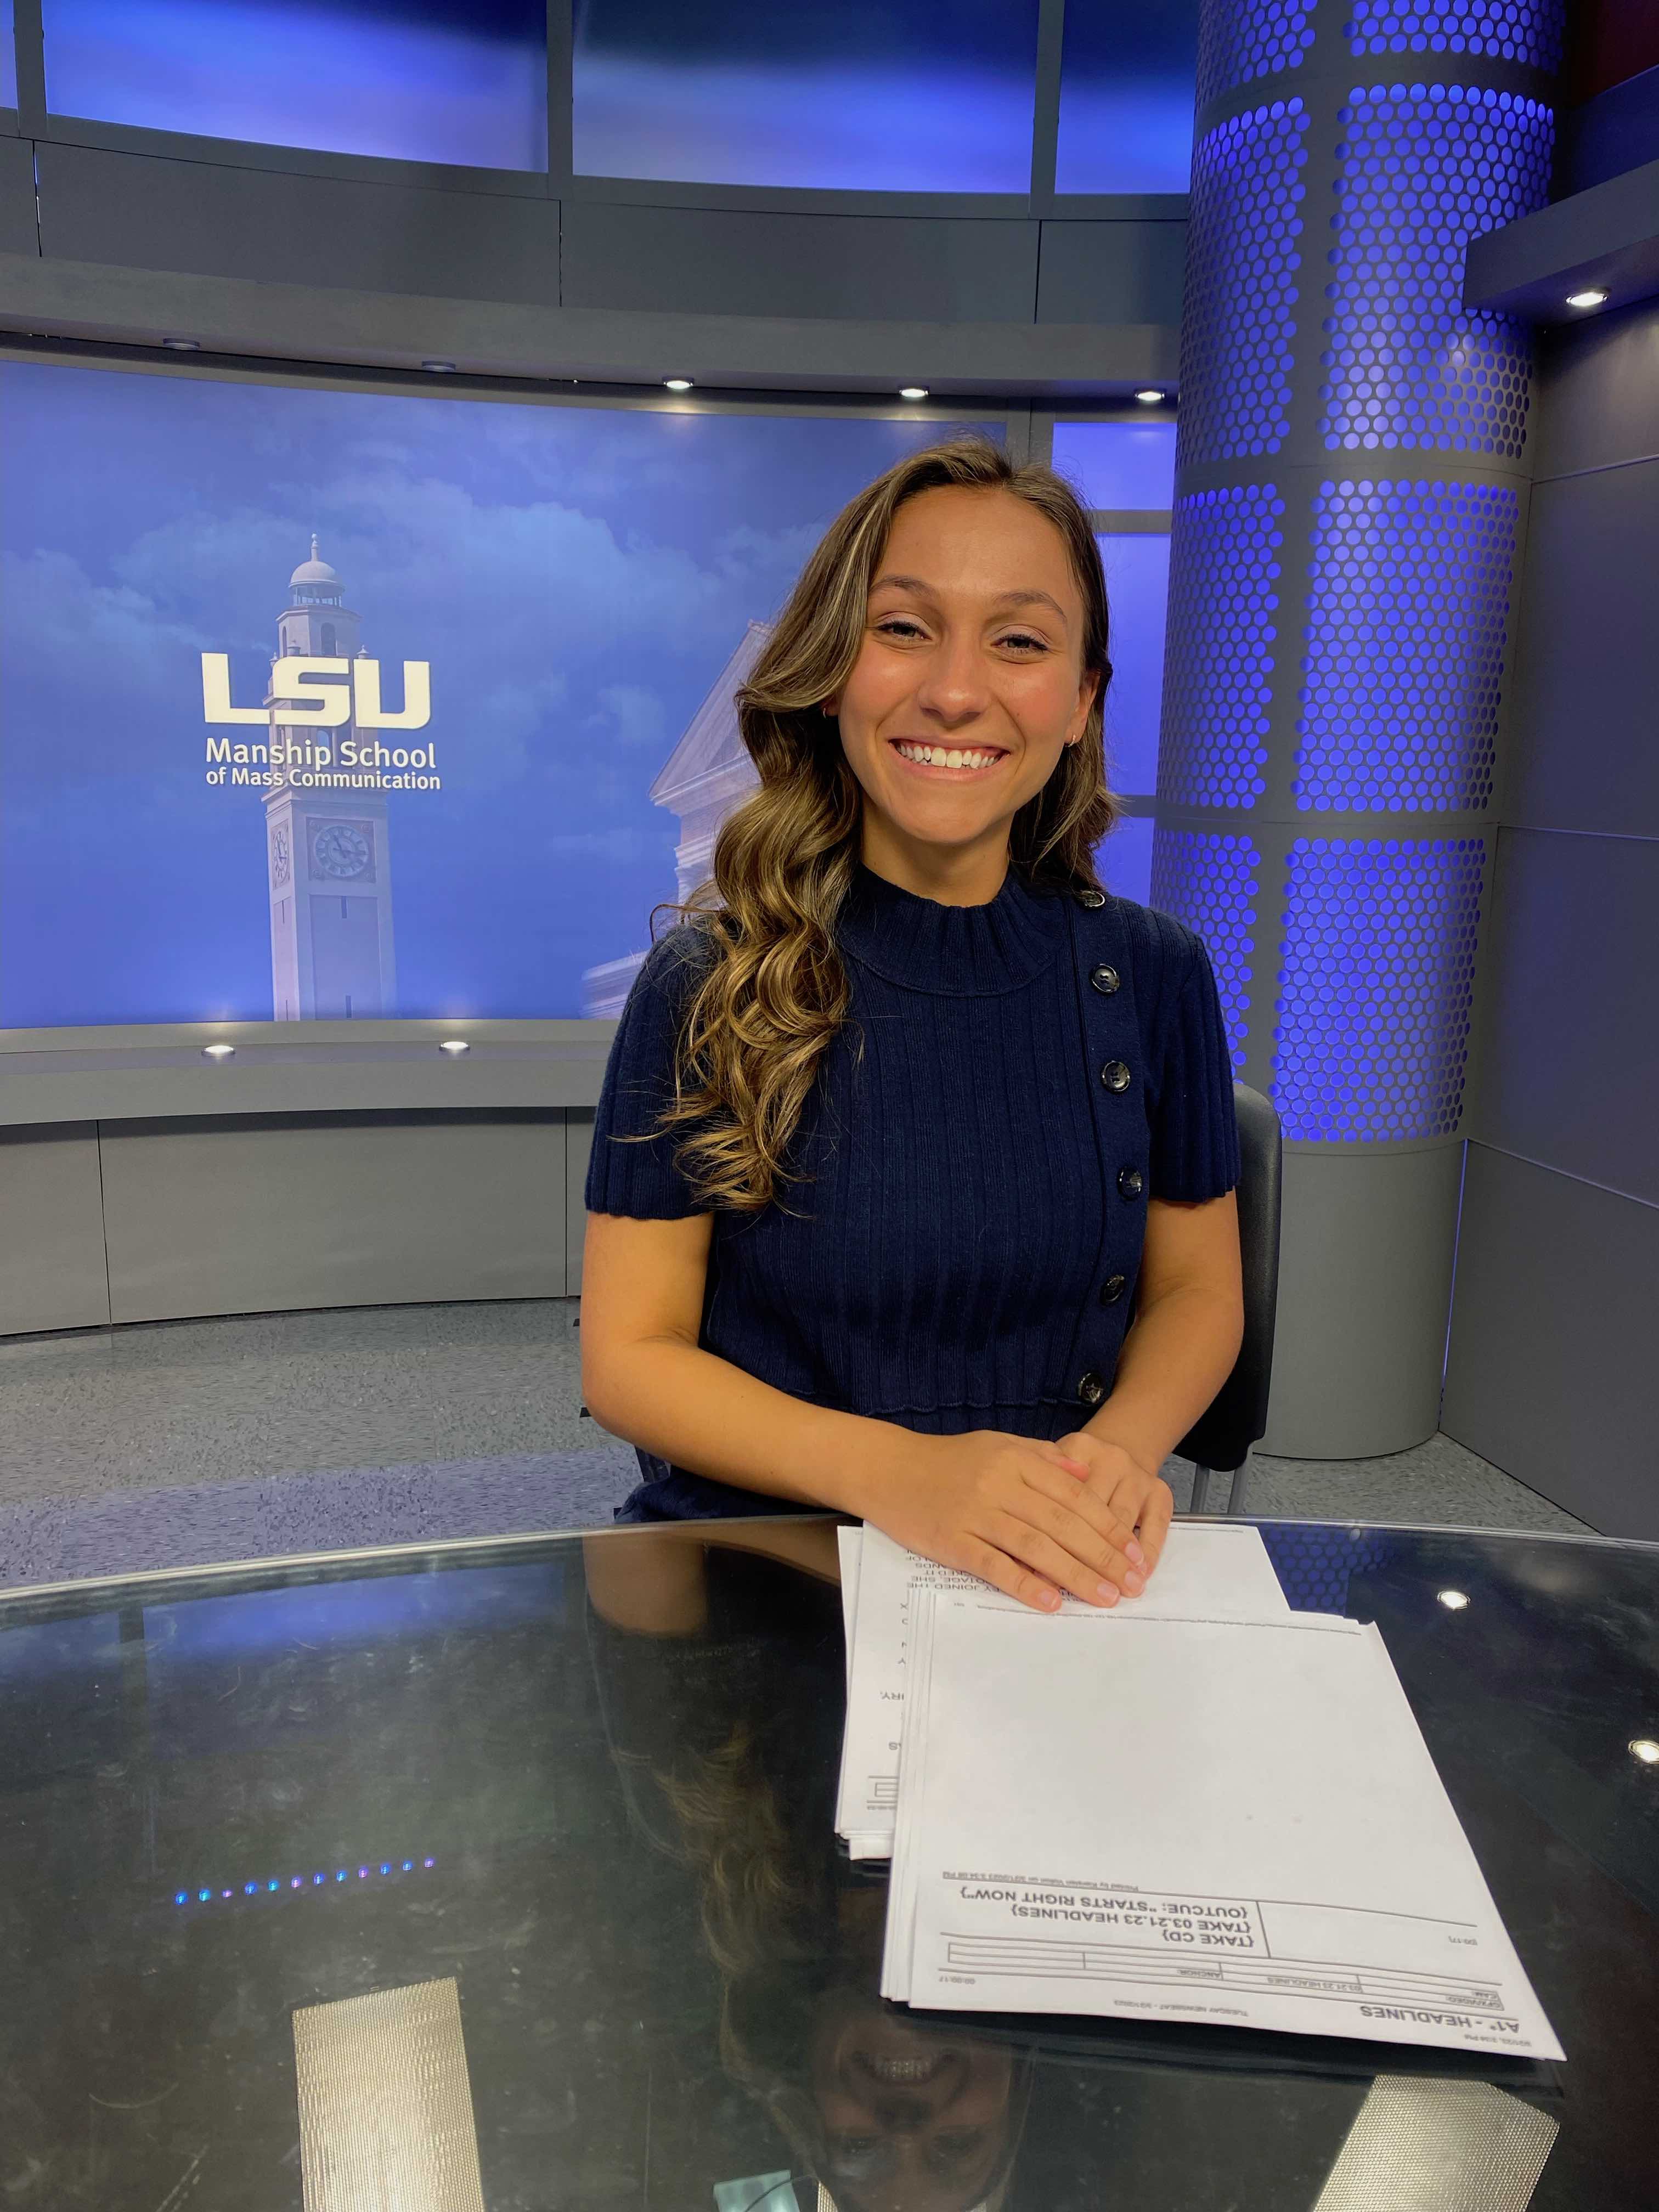 LSU Senior Earns Sixth Place in National Journalism Competition